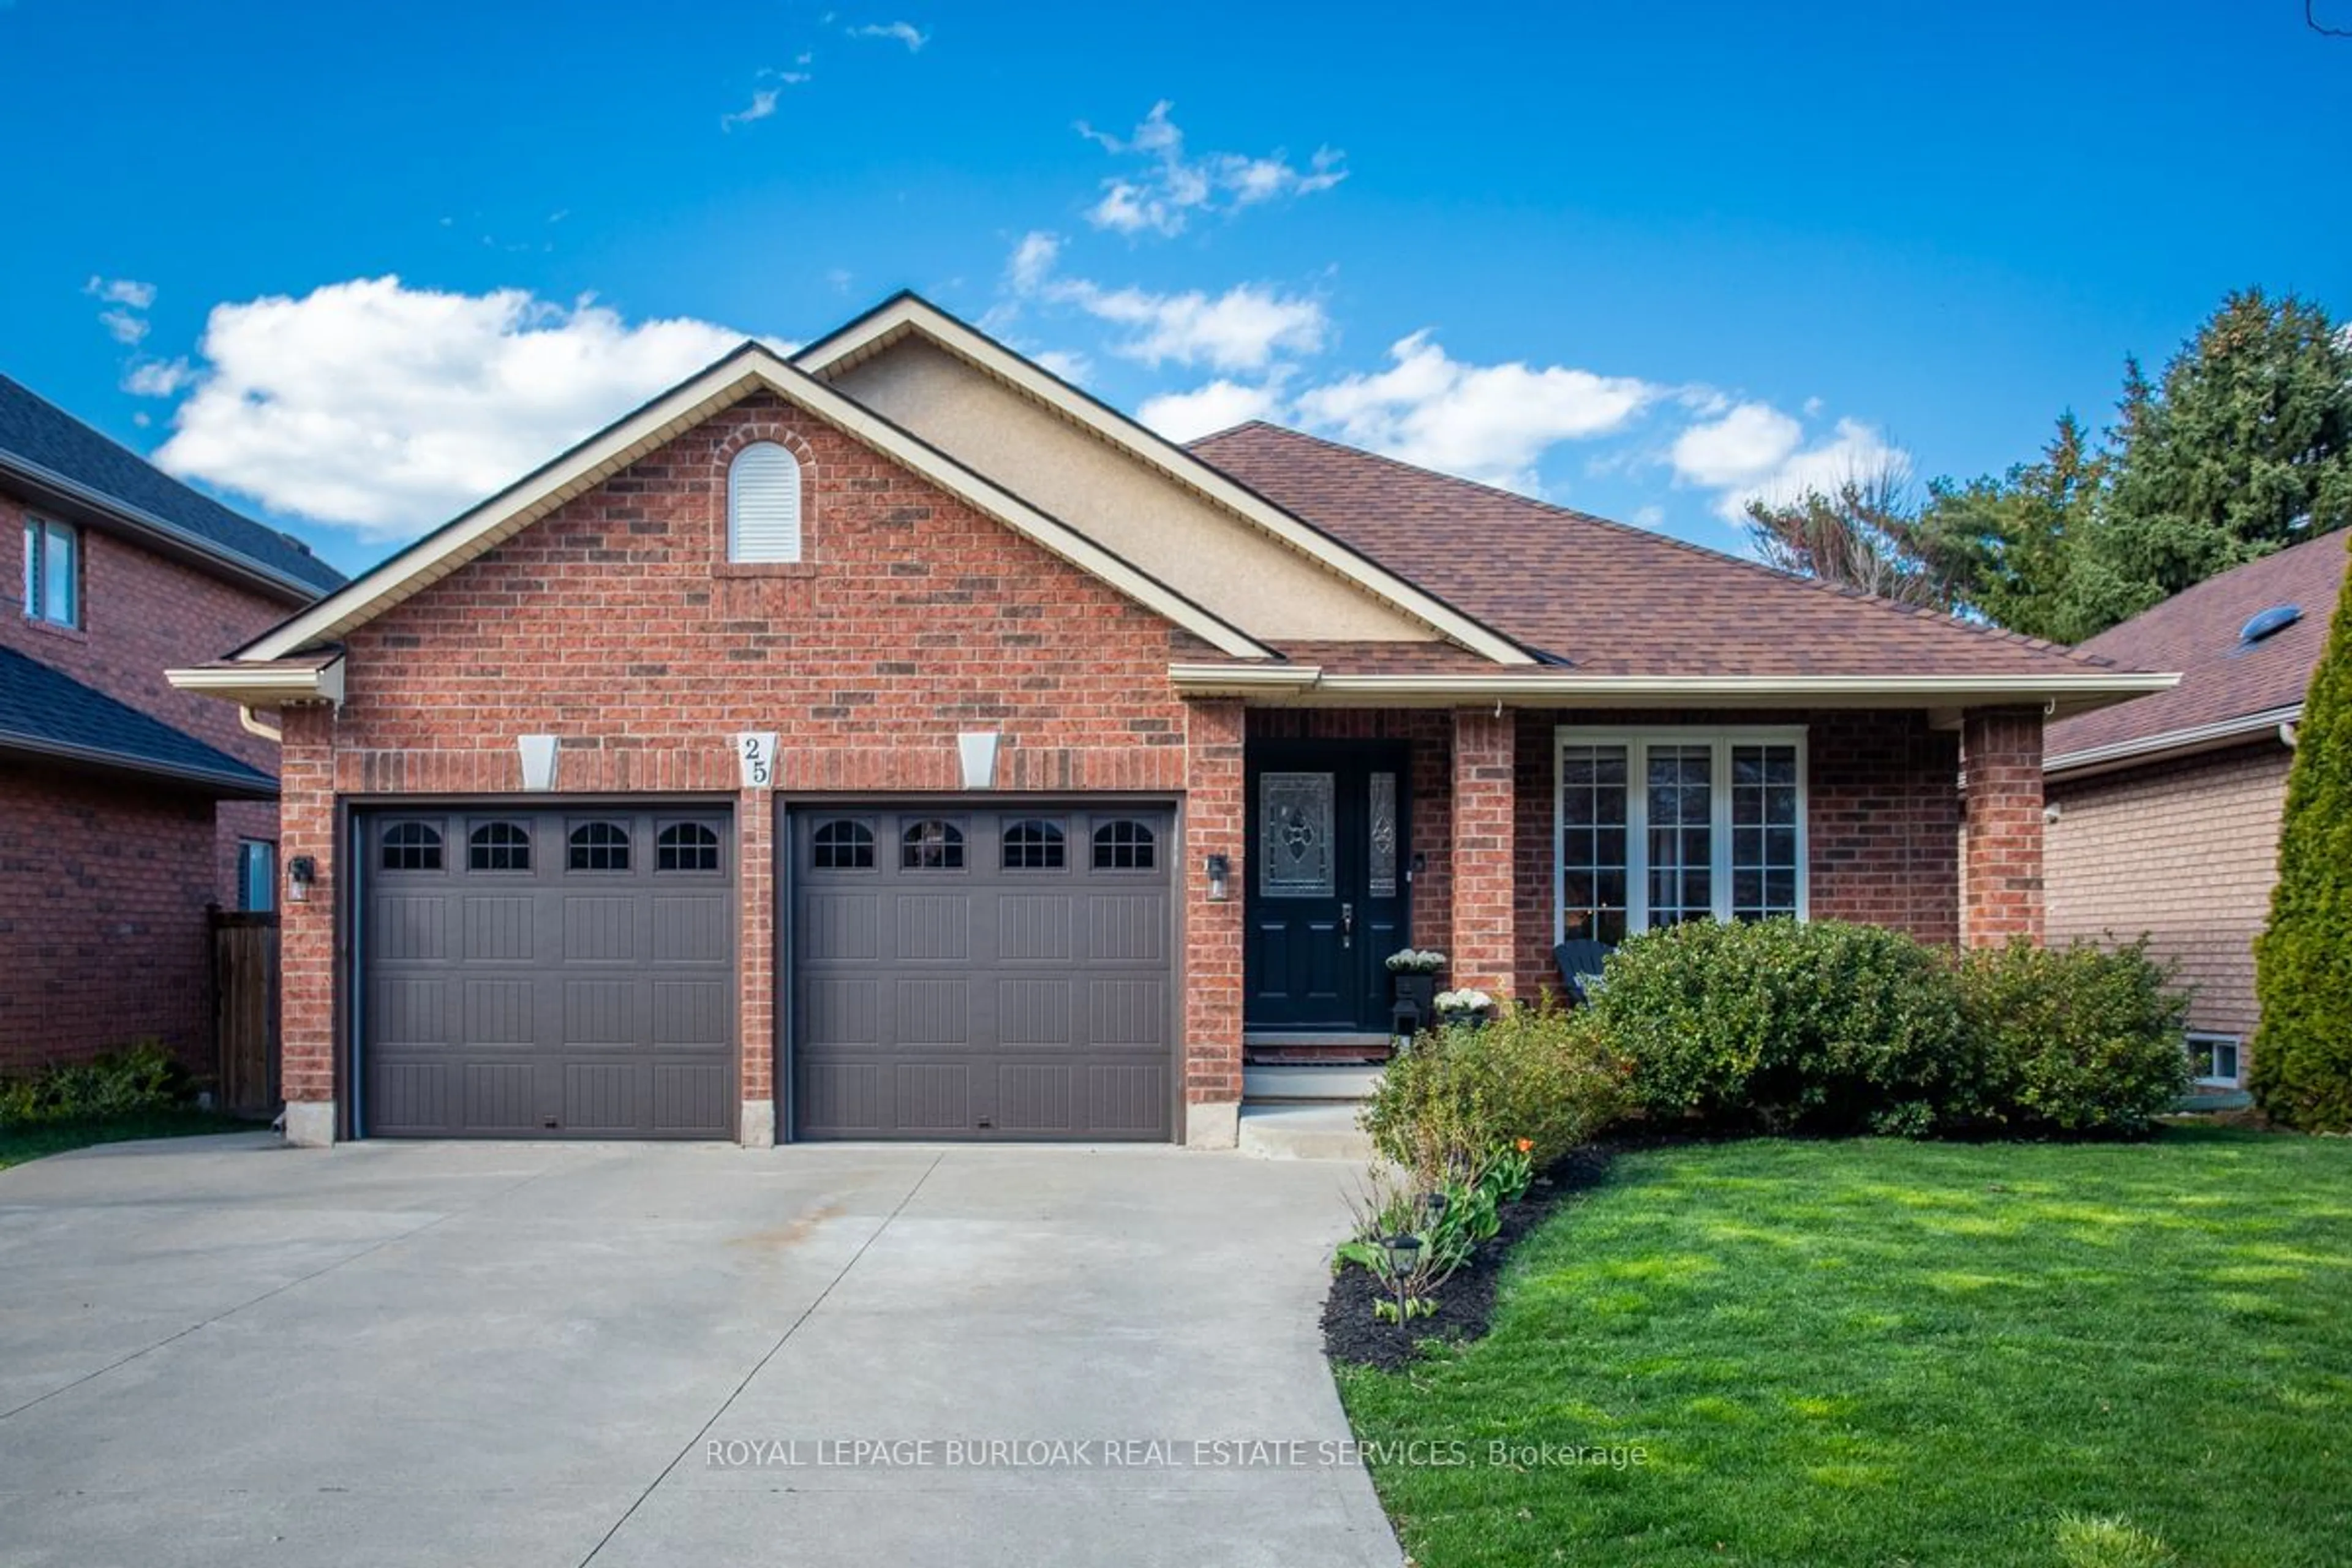 Home with brick exterior material for 25 Evergreens Dr, Grimsby Ontario L3M 5P8